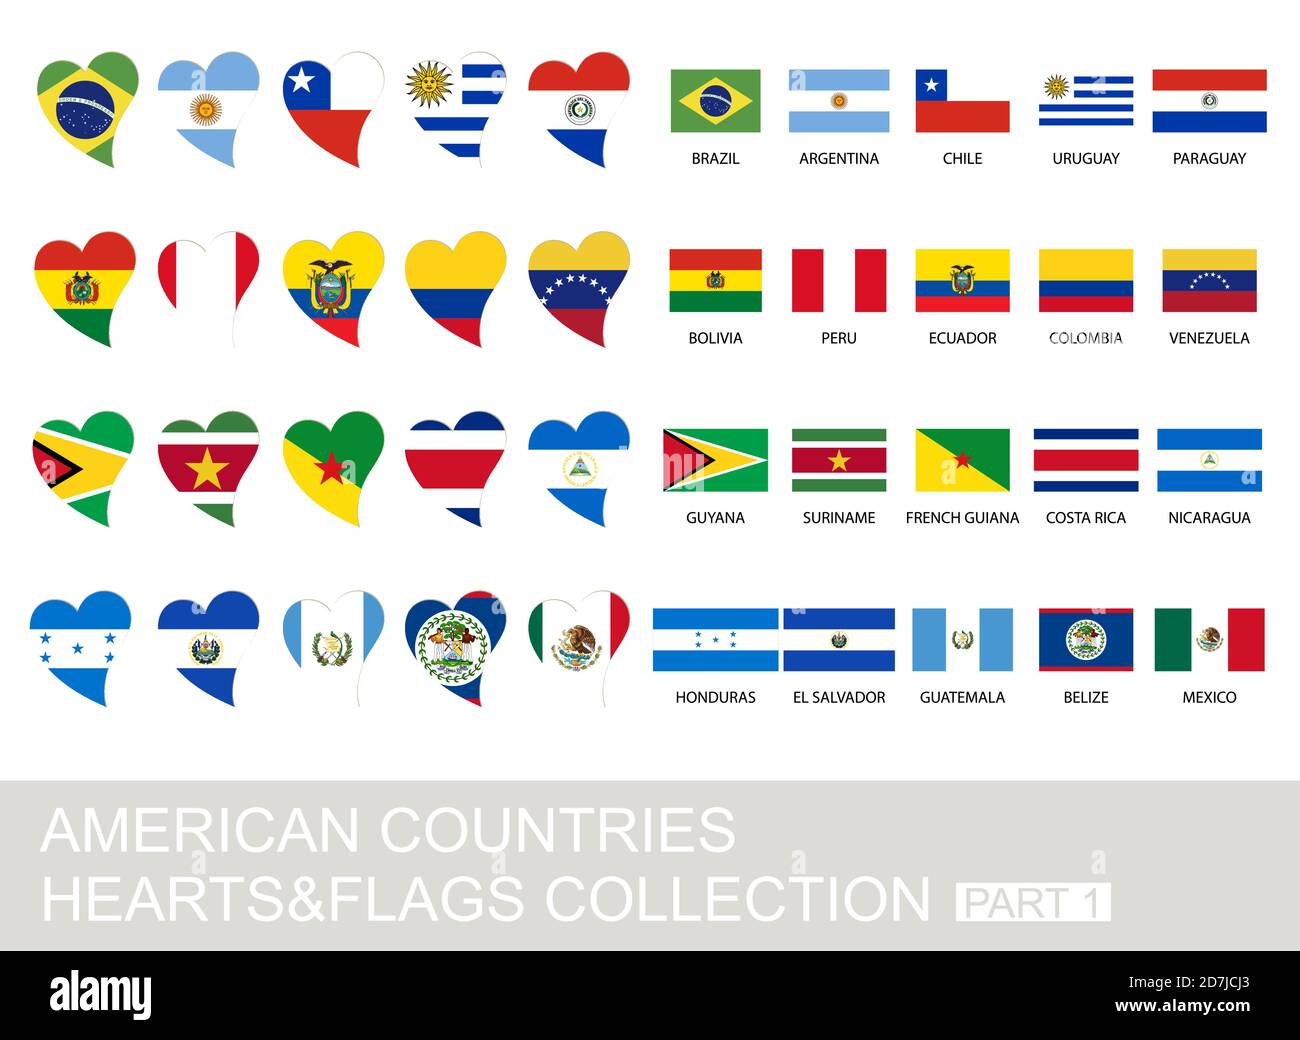 American countries set, hearts and flags, 2  version, part 1 Stock Vector